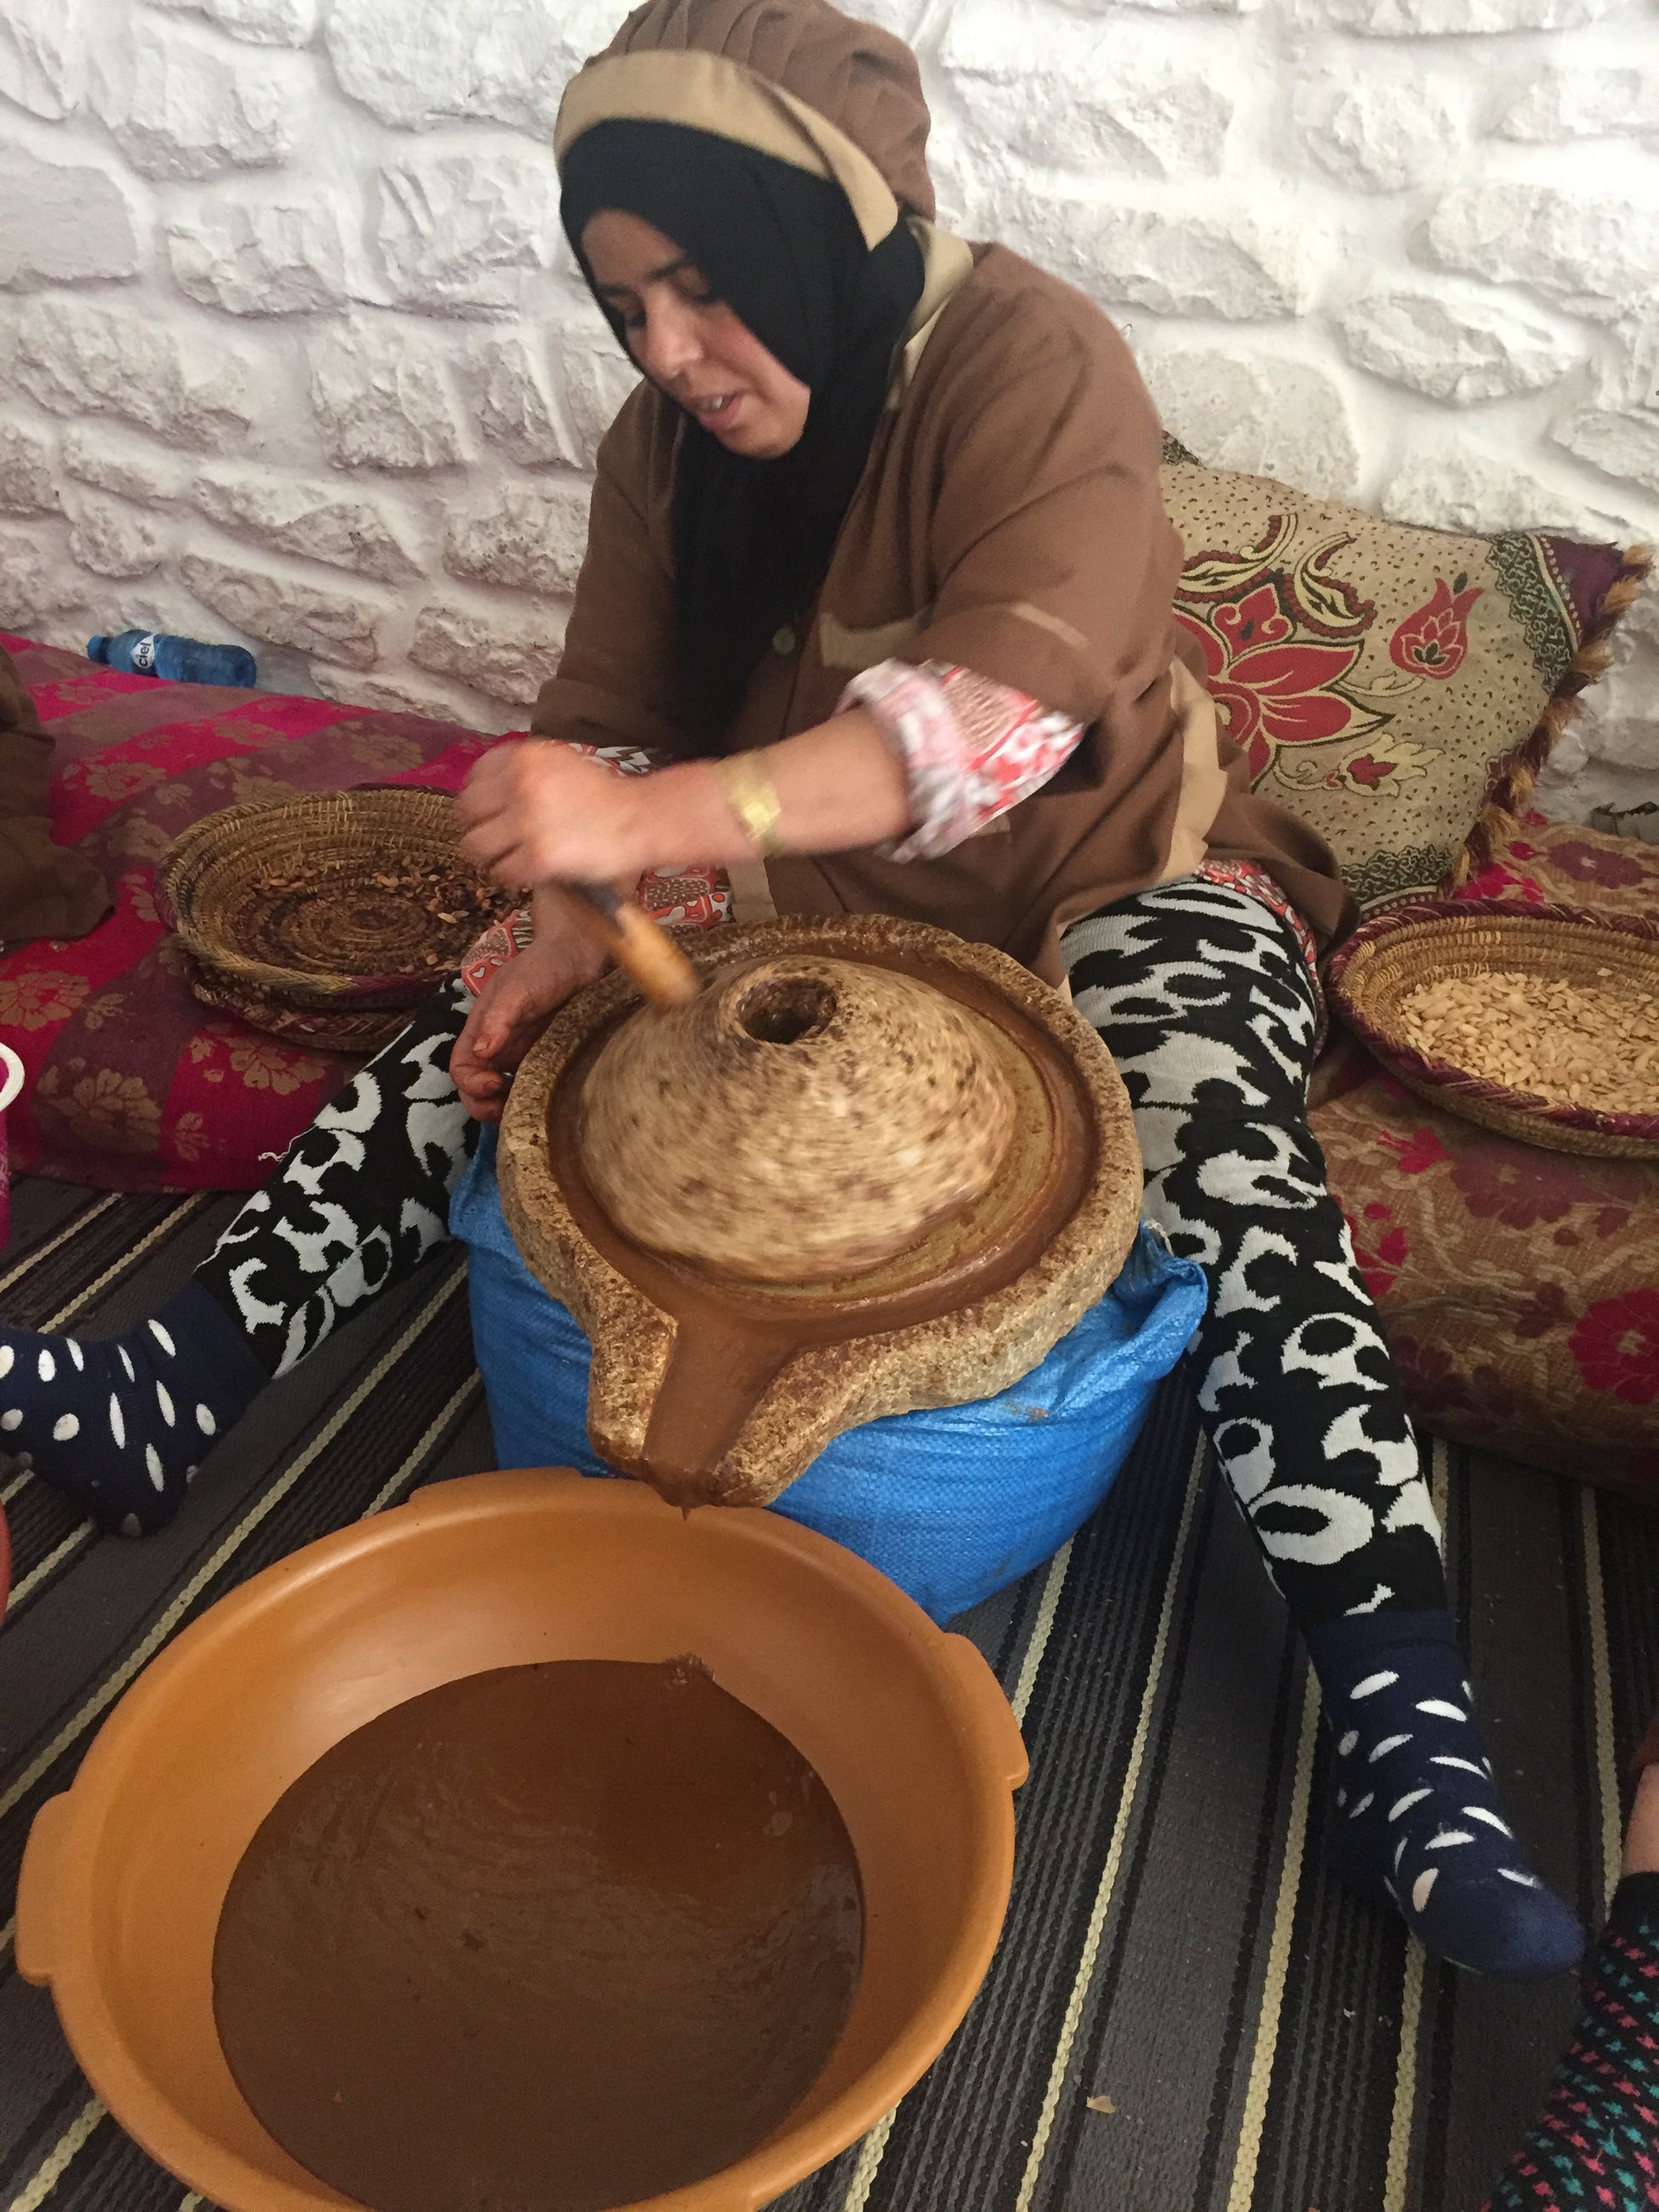 Our Argan oil is made by Berber women from Morocco